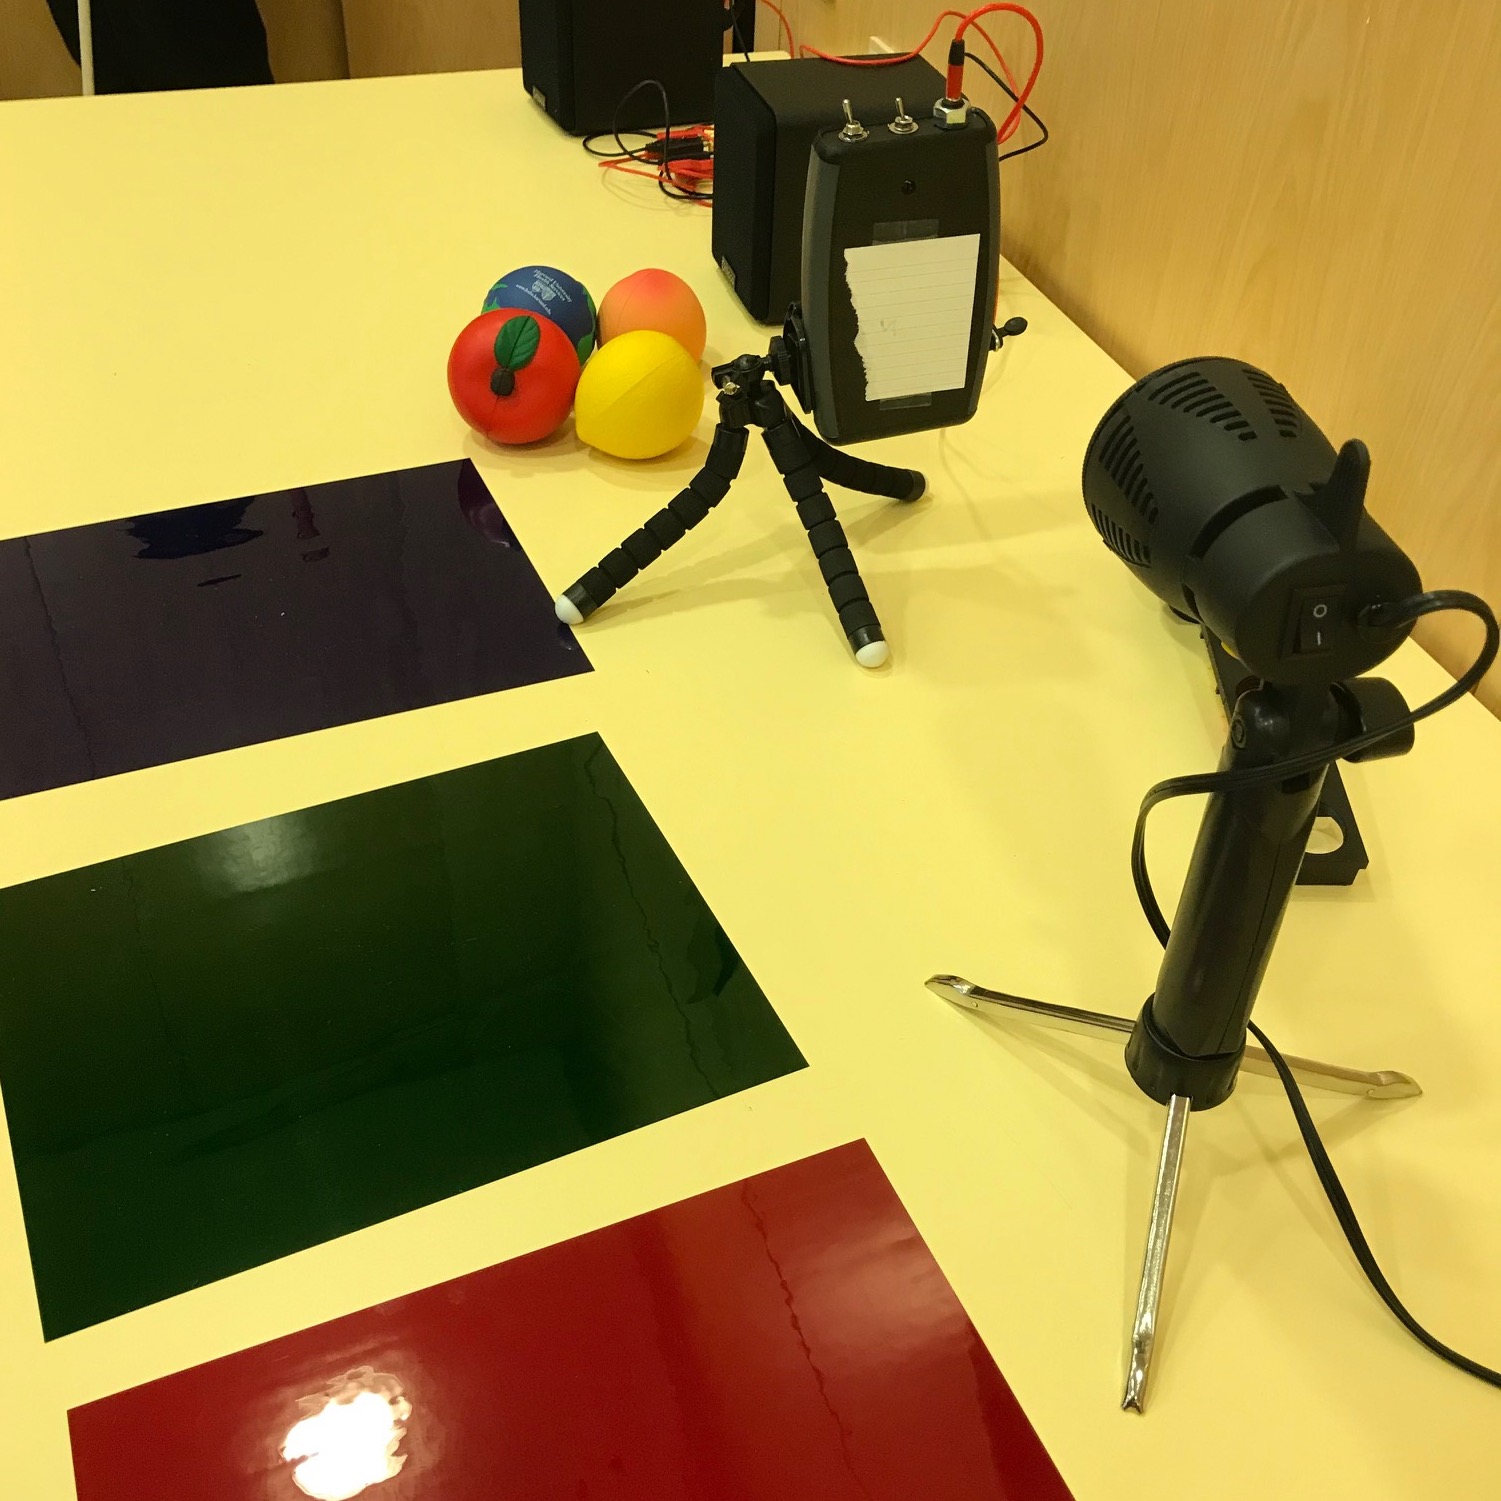 Plastic color filters (red, green, and blue) sit on a table with a LightSound device on a table top bendable tripod and a light source all ready for a demo of how the sound changes with color changes.